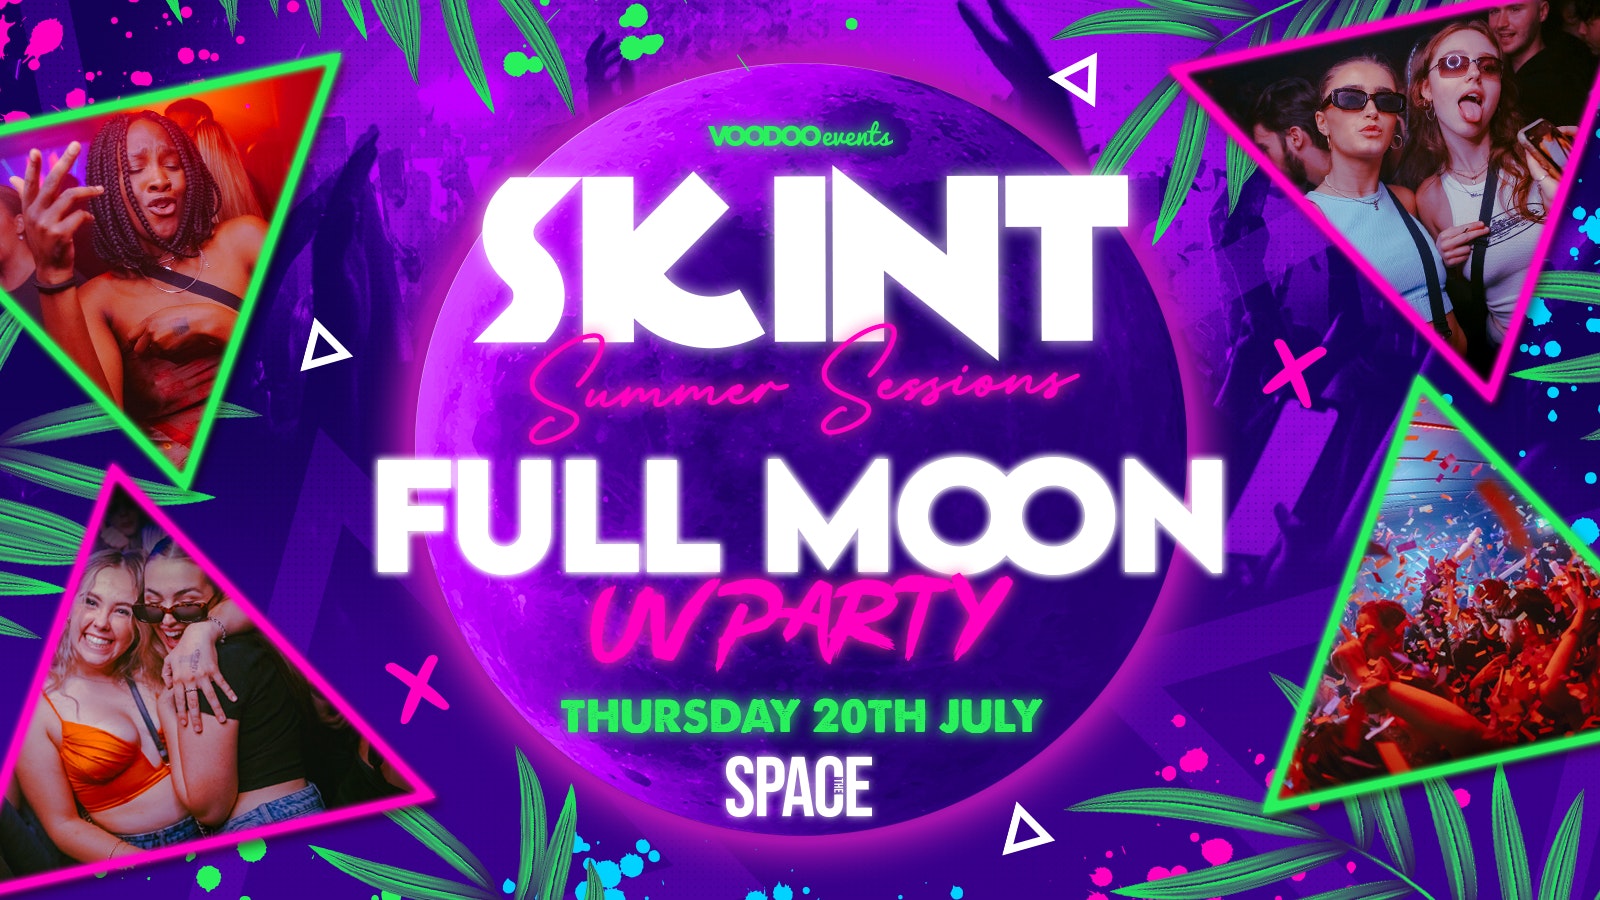 Skint Thursdays at Space – Full Moon UV Party – 20th July